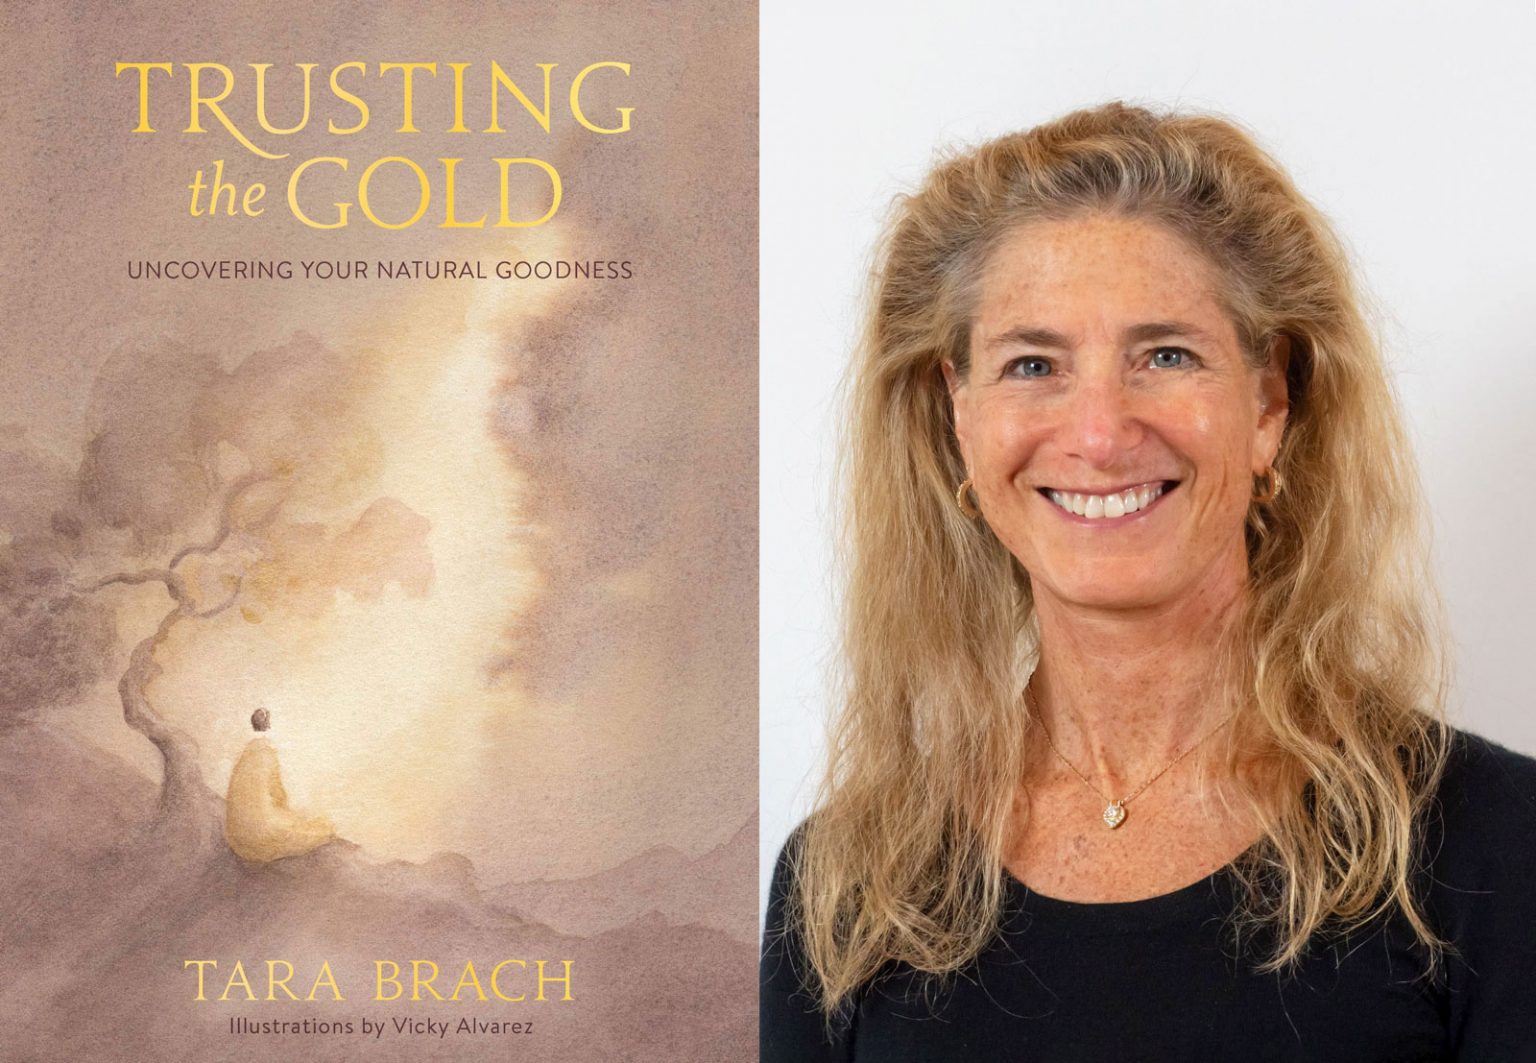 Trusting the Gold by Tara Brach and Lessons on Acceptance Tricycle